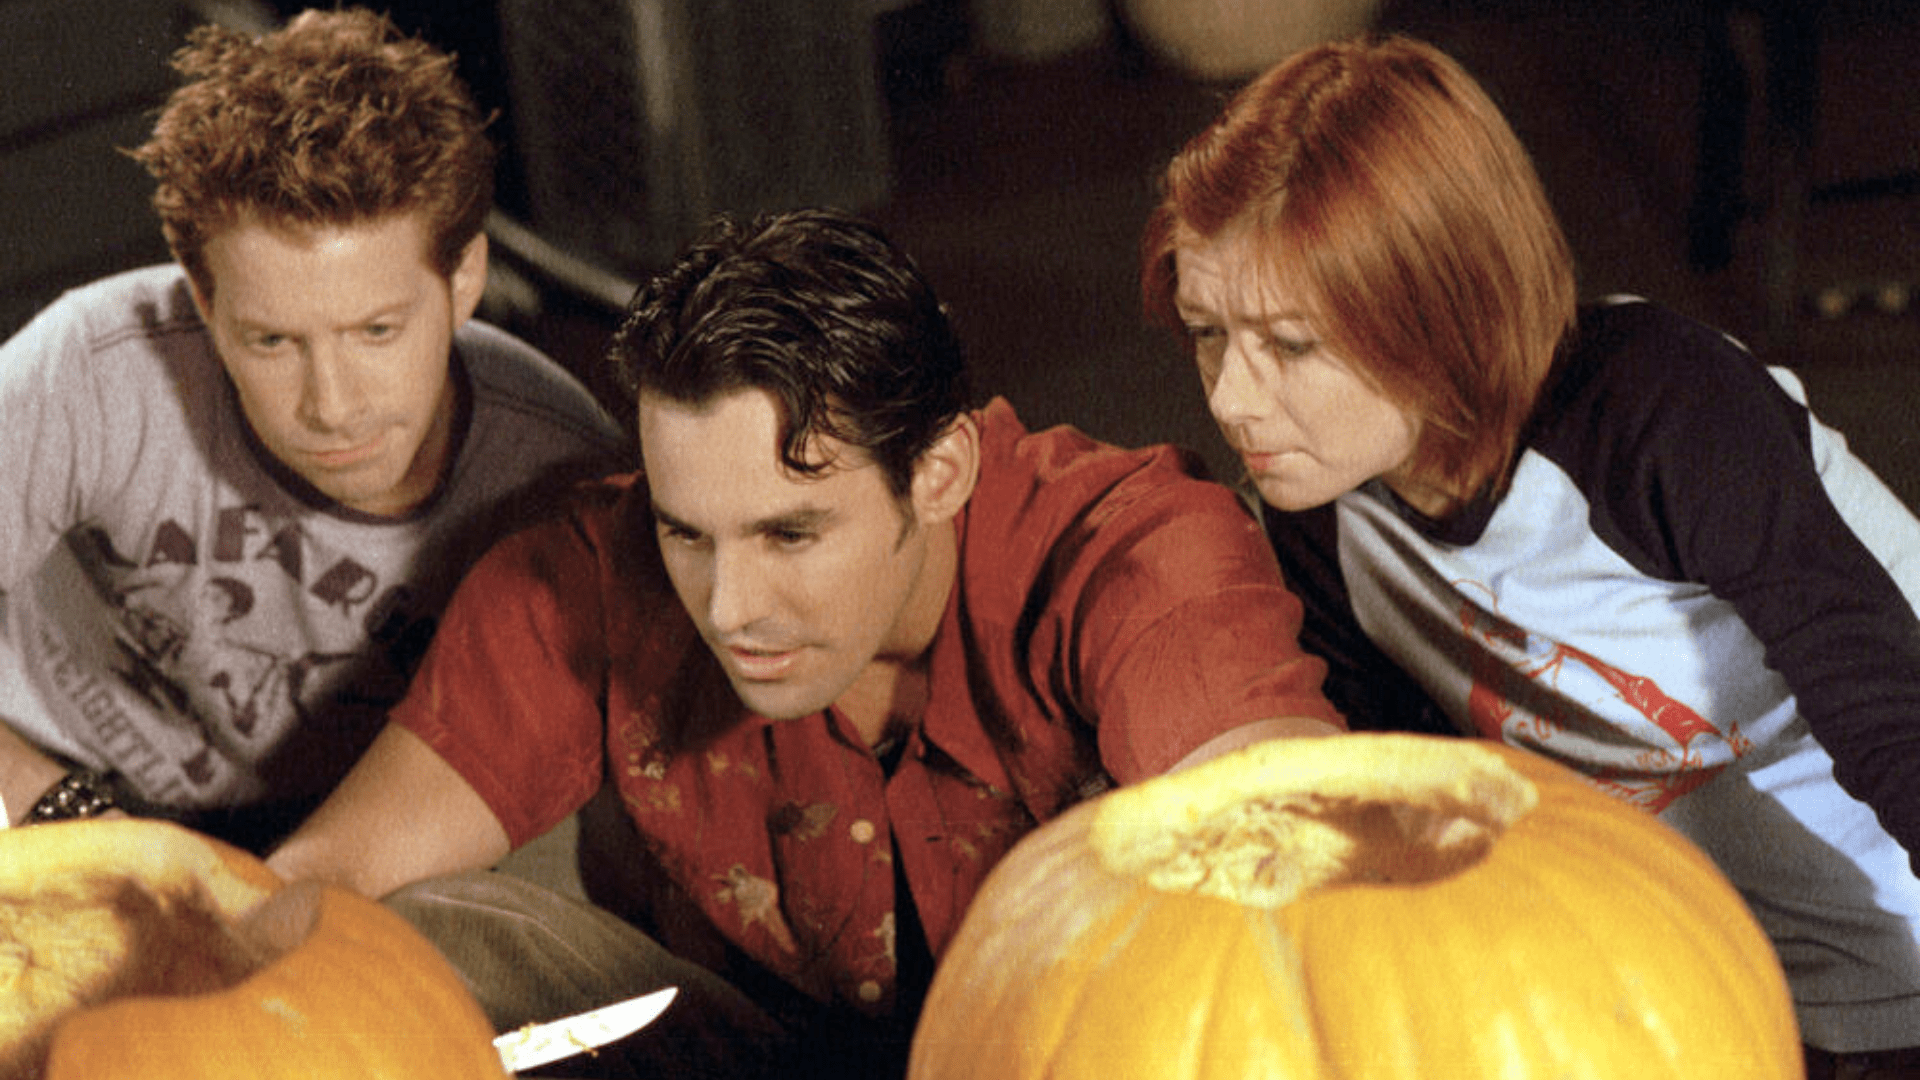 Buffy Halloween Episodes - These Are The Buffy The Vampire Slayer Halloween Episodes